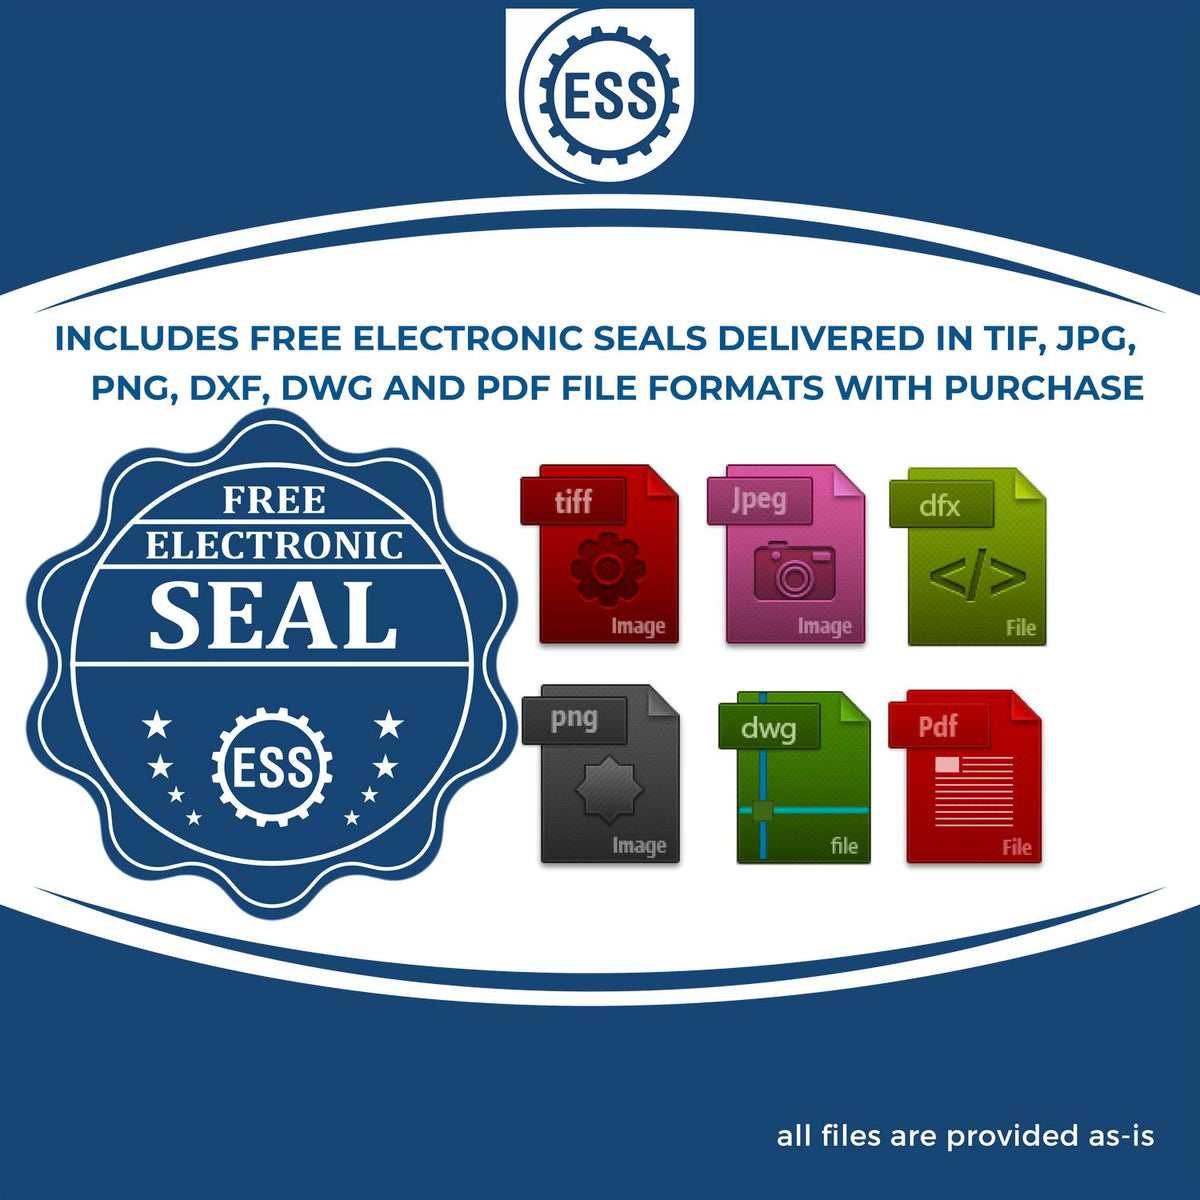 An infographic for the free electronic seal for the Gift Michigan Geologist Seal illustrating the different file type icons such as DXF, DWG, TIF, JPG and PNG.